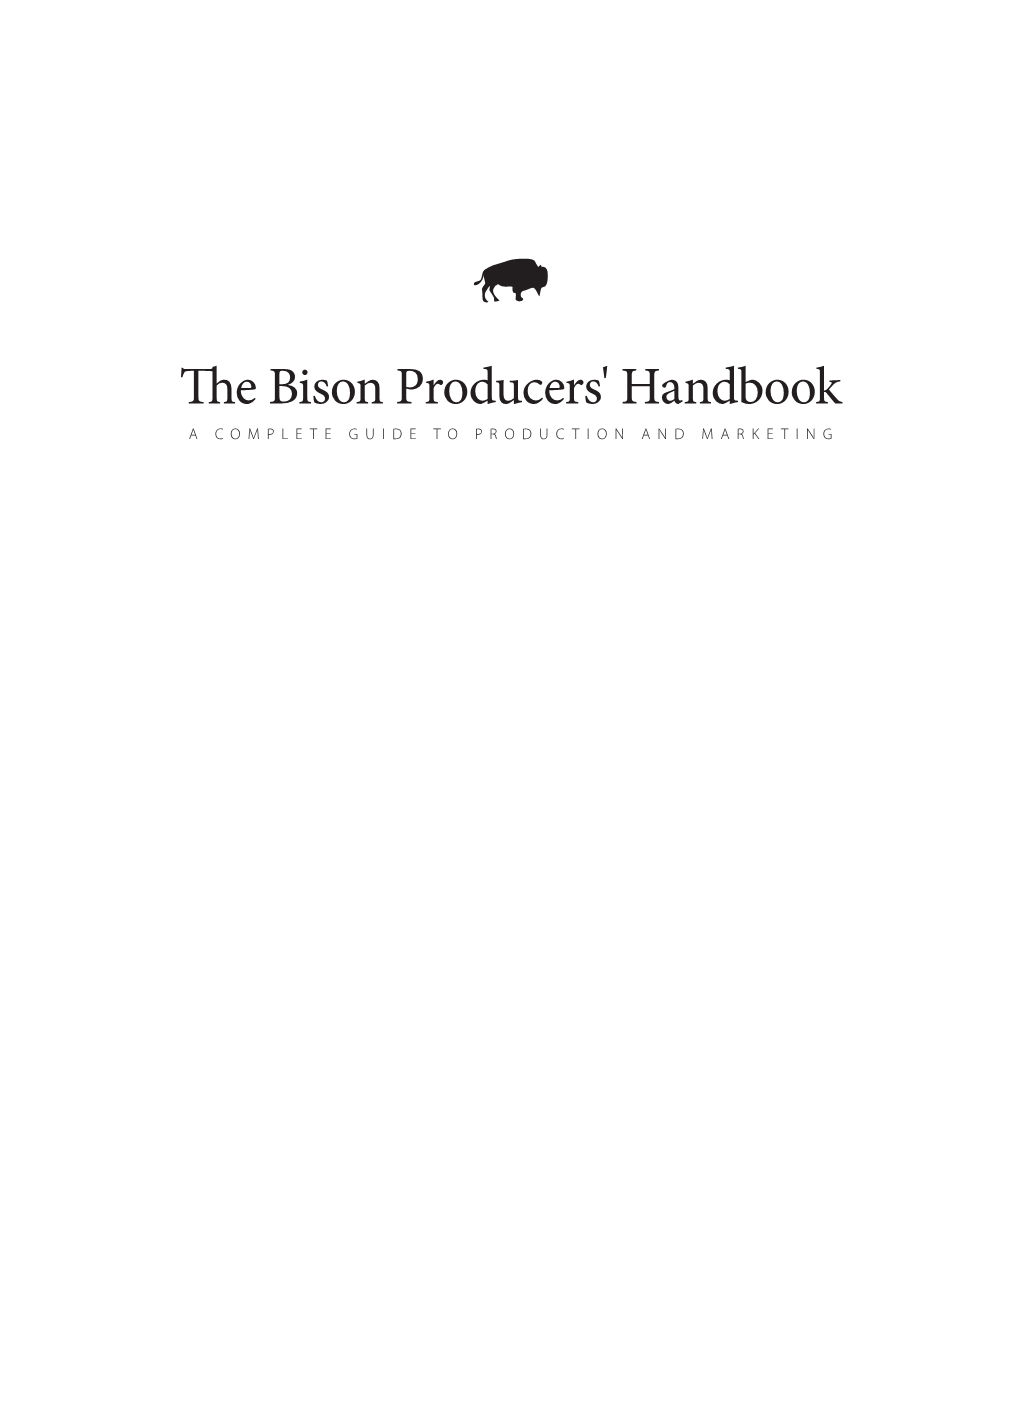 The Bison Producers' Handbook a COMPLETE GUIDE to PRODUCTION and MARKETING